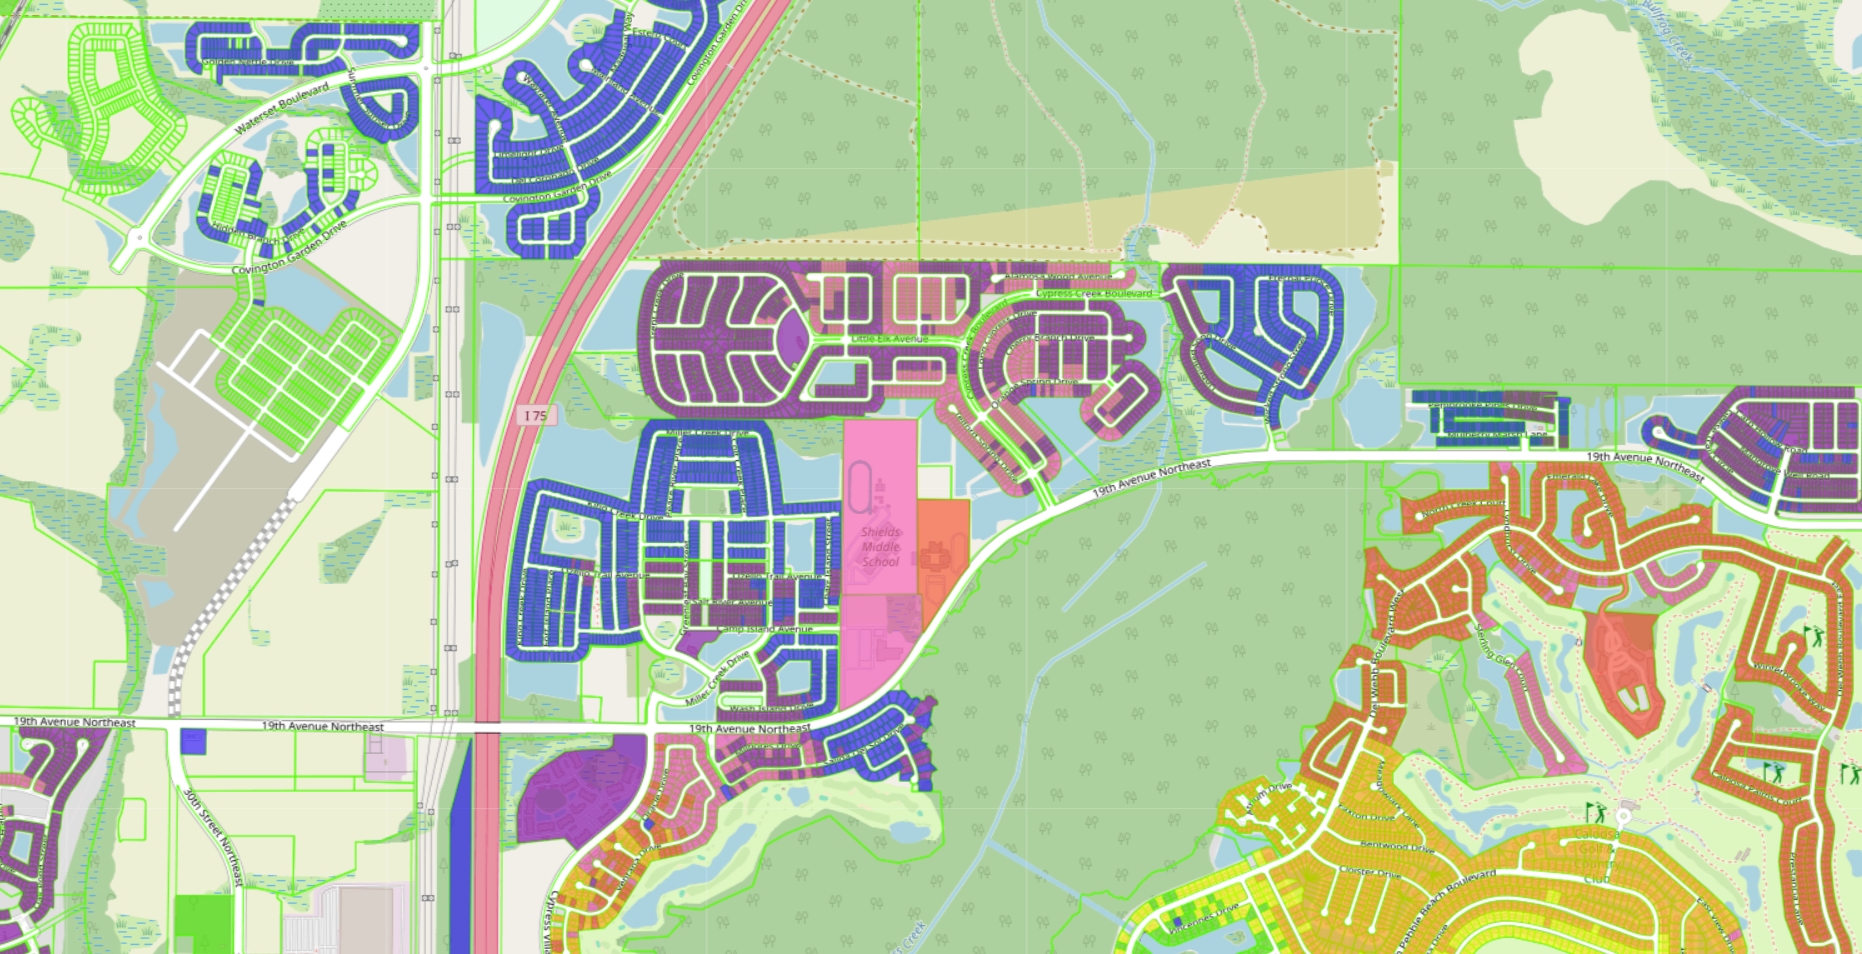 Example of parcels color coded by year built. Colors correspond to decades. Makes it easy to spot areas of new development and growth trends over time.